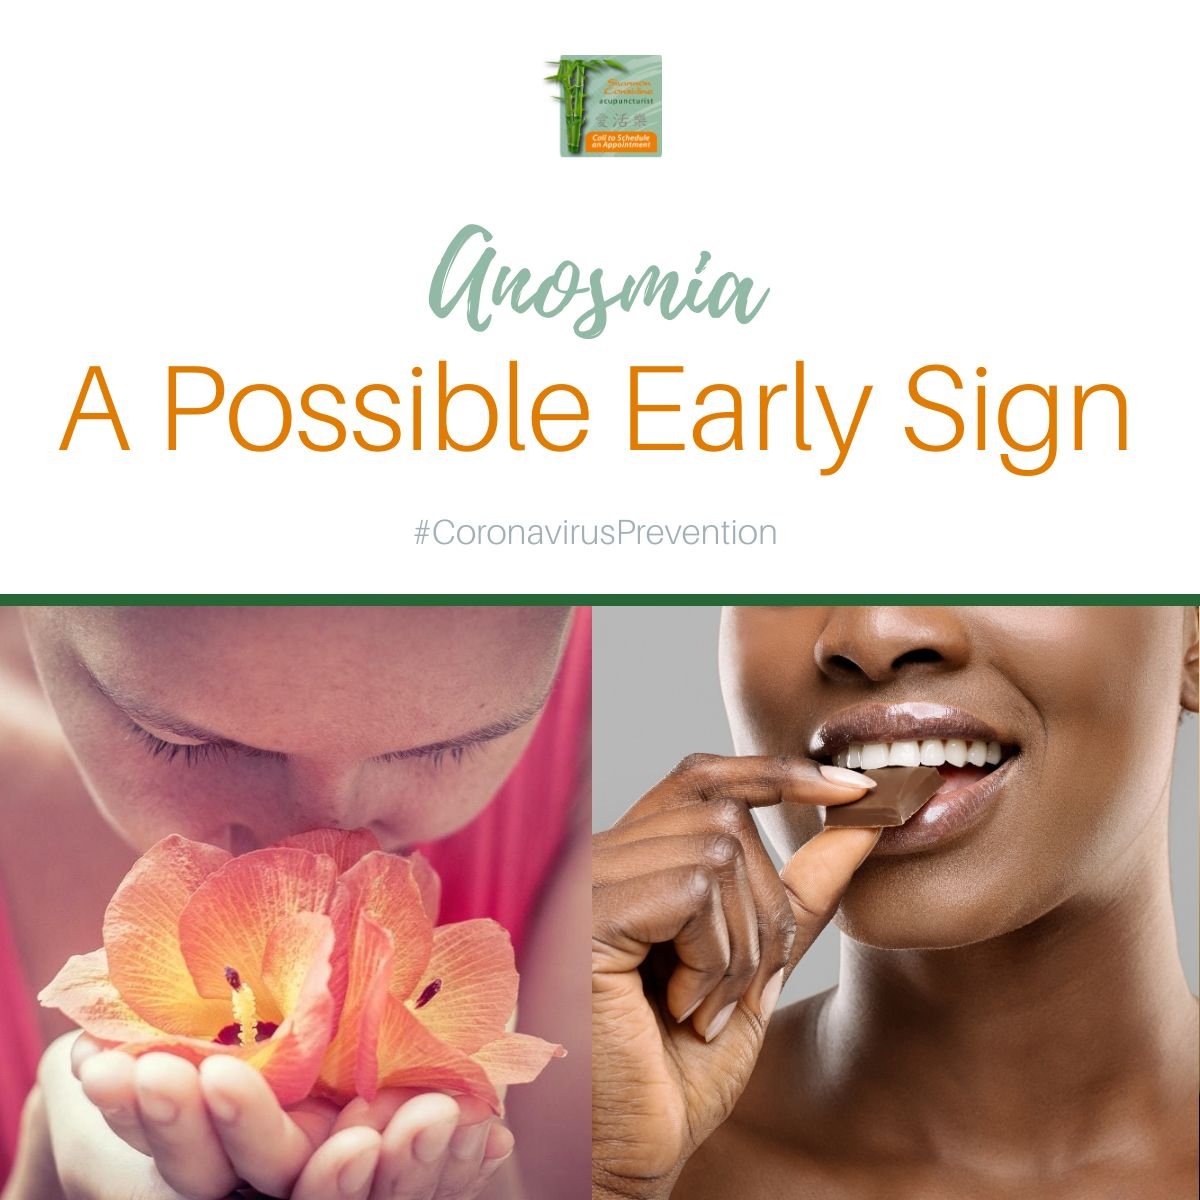 Anosmia – A Possible Early Sign of Covid-19?